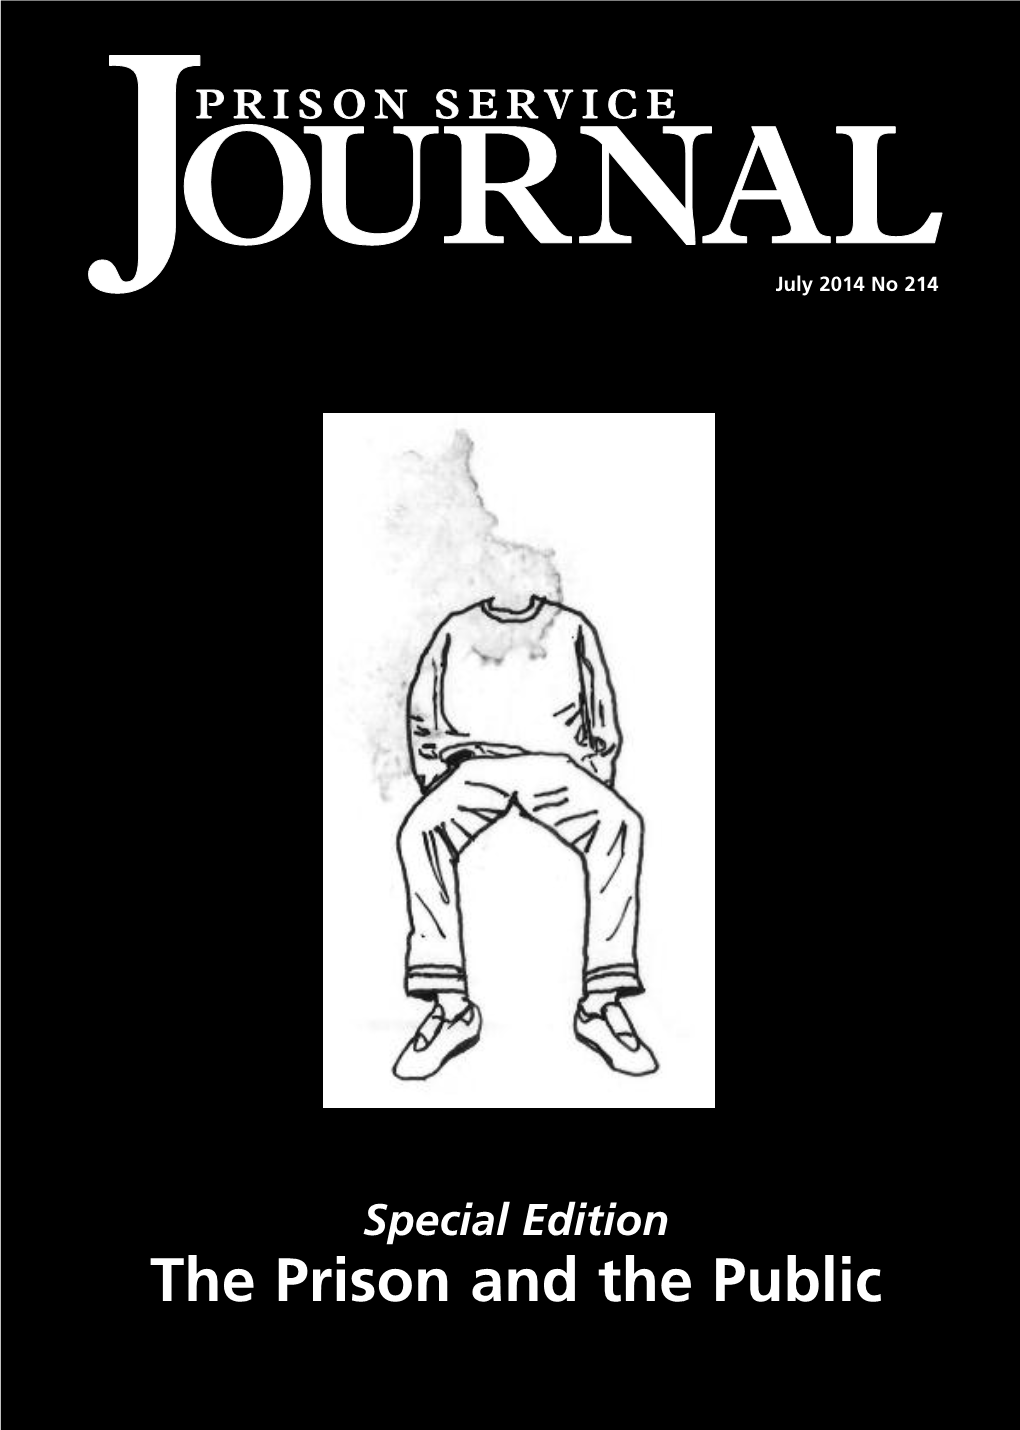 Prison Service Journal Is a Peer Reviewed Journal Published by HM Prison Service of England and Wales